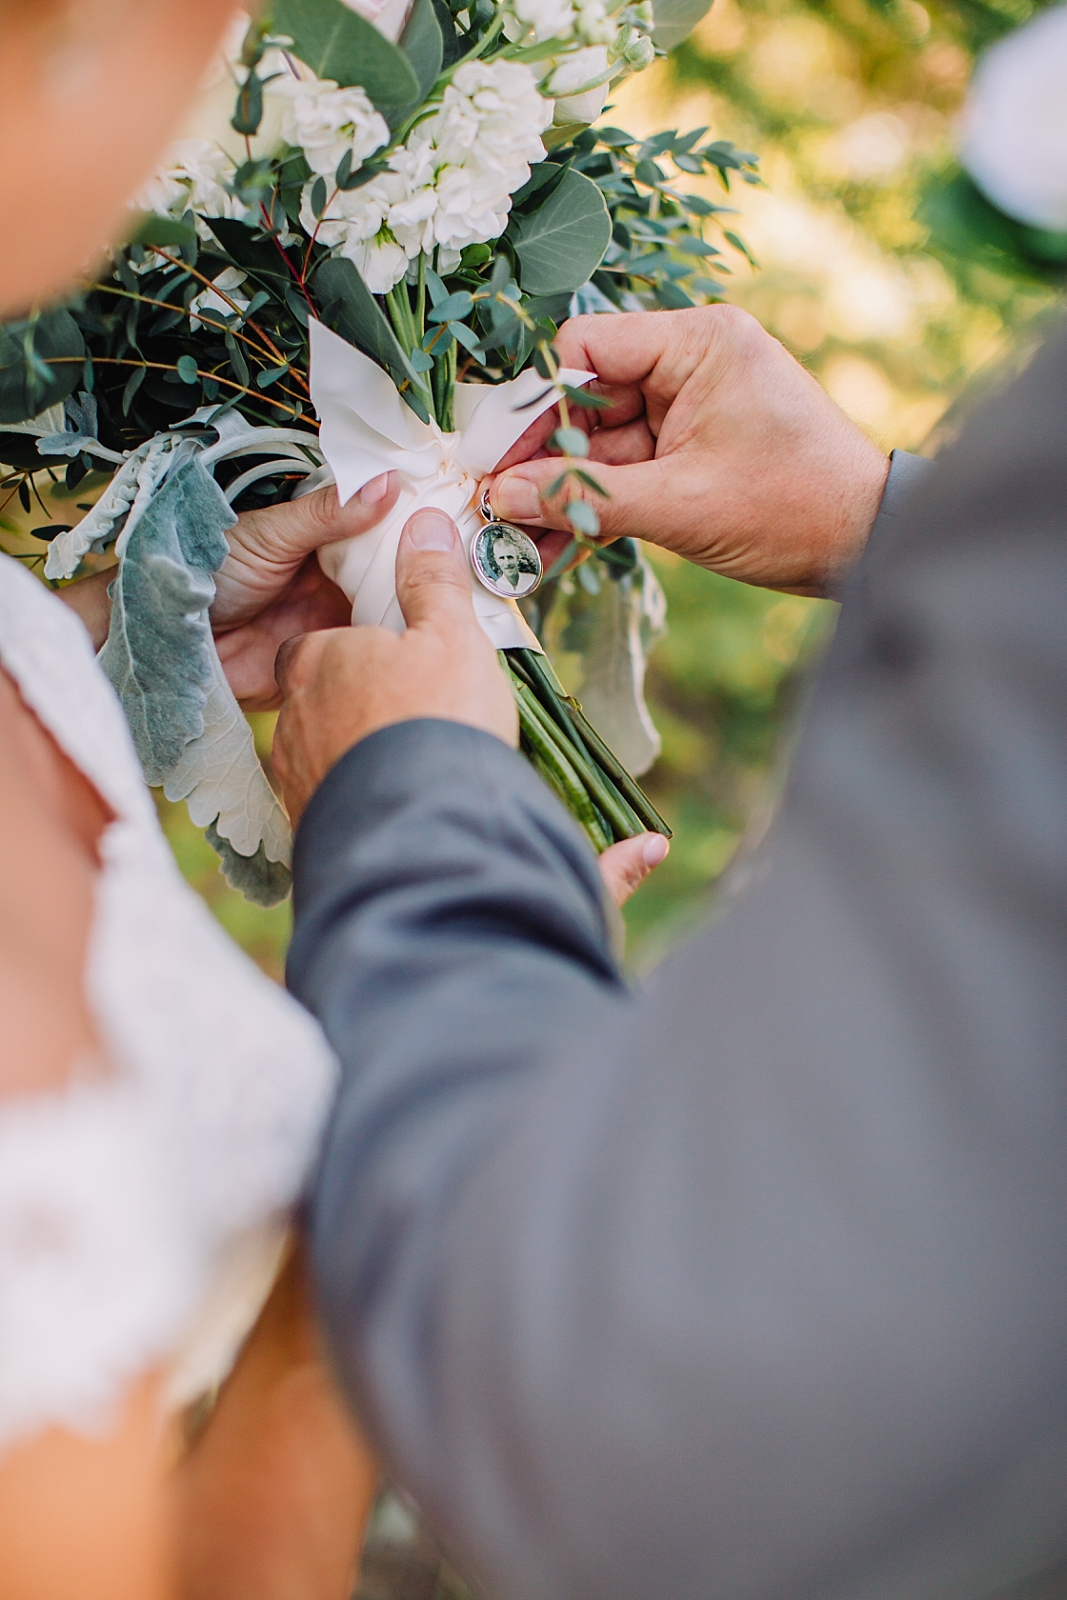 wedding ideas, give sentimental gifts to parents